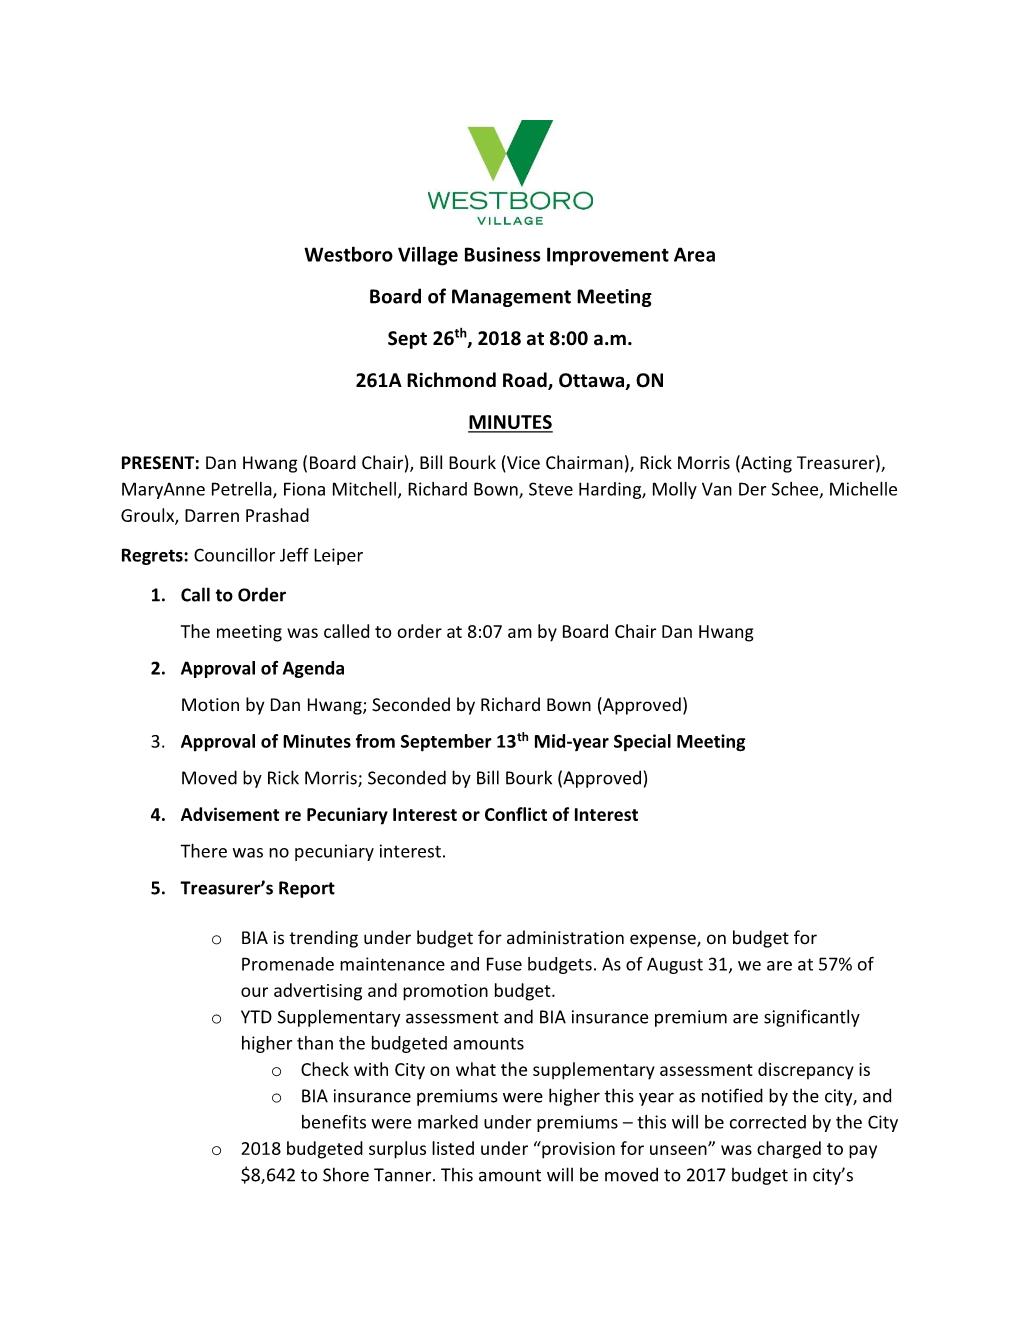 Westboro Village Business Improvement Area Board of Management Meeting Sept 26Th, 2018 at 8:00 A.M